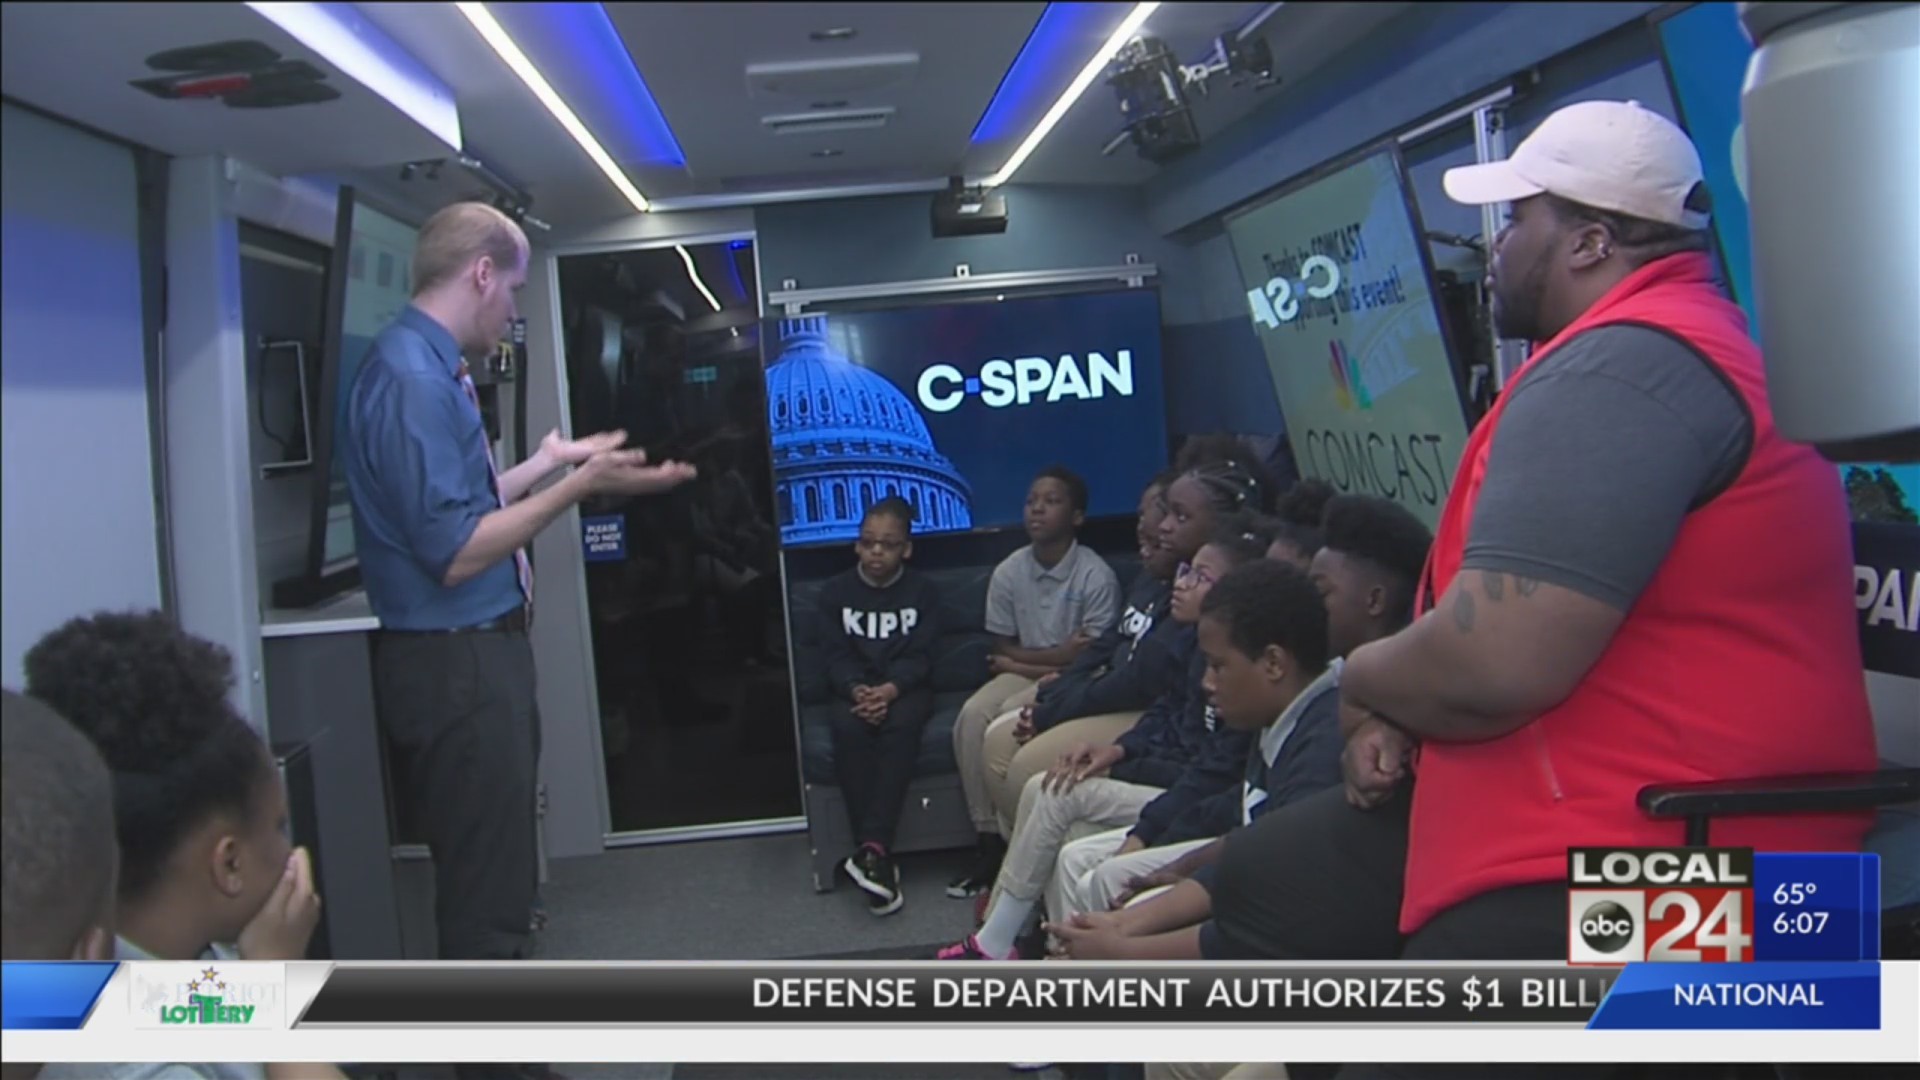 C-SPAN's Interactive Bus Makes Stop At Local Middle School